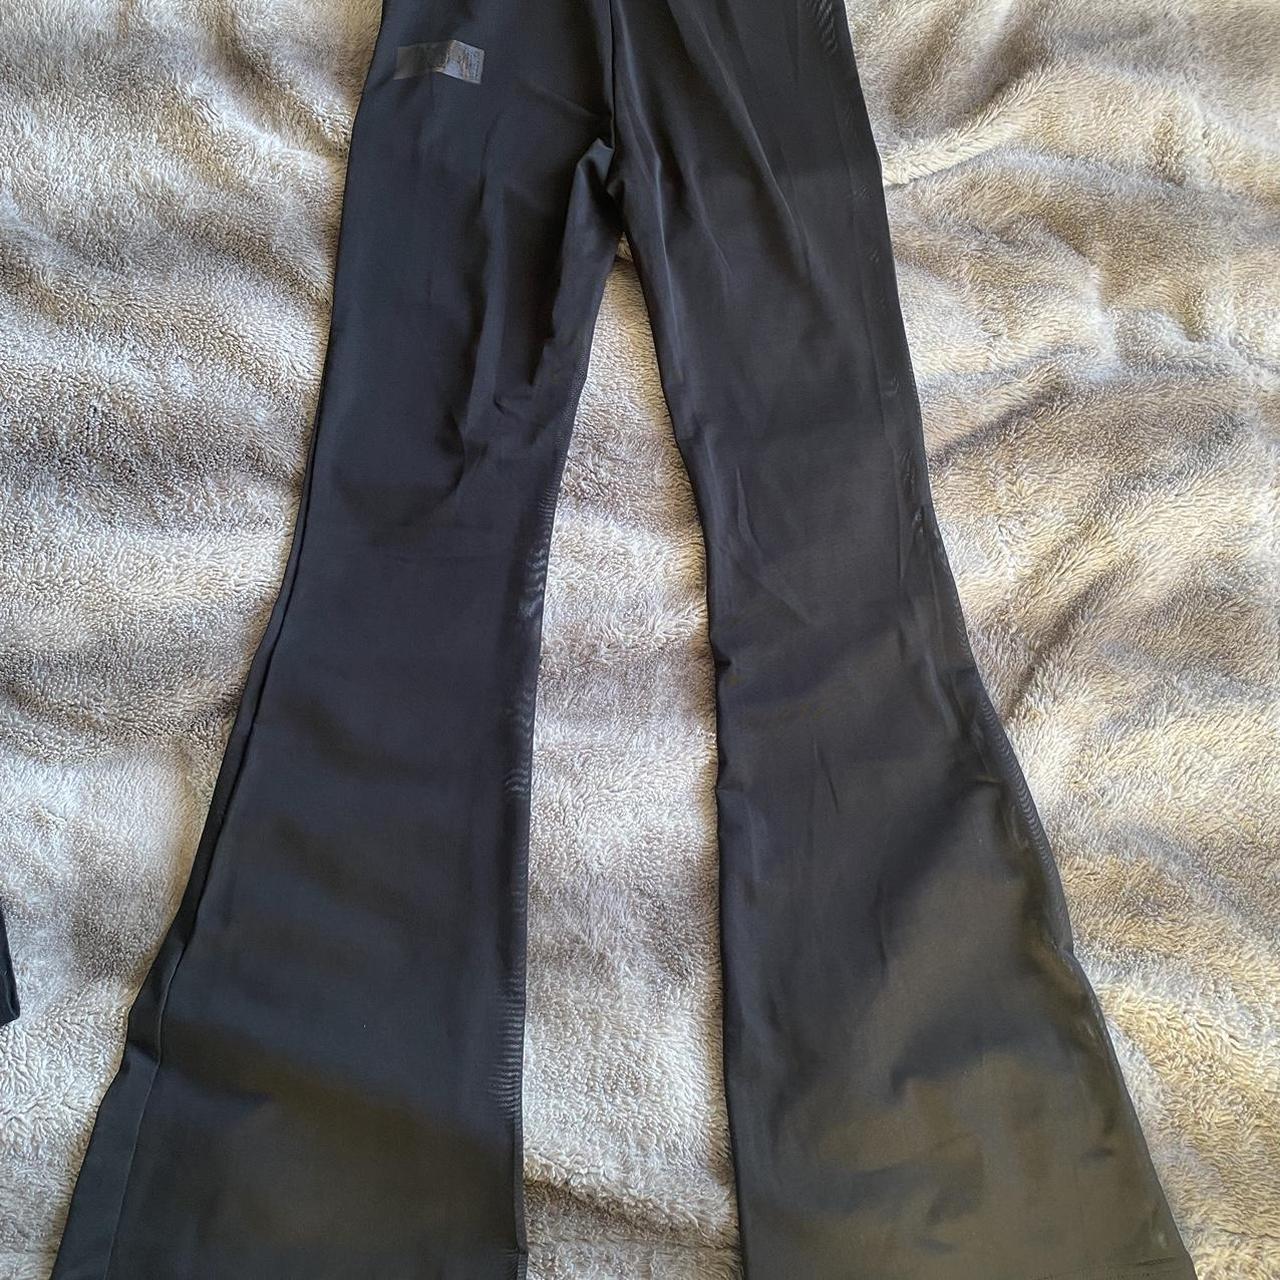 Rave see through black flared pants size small never... - Depop